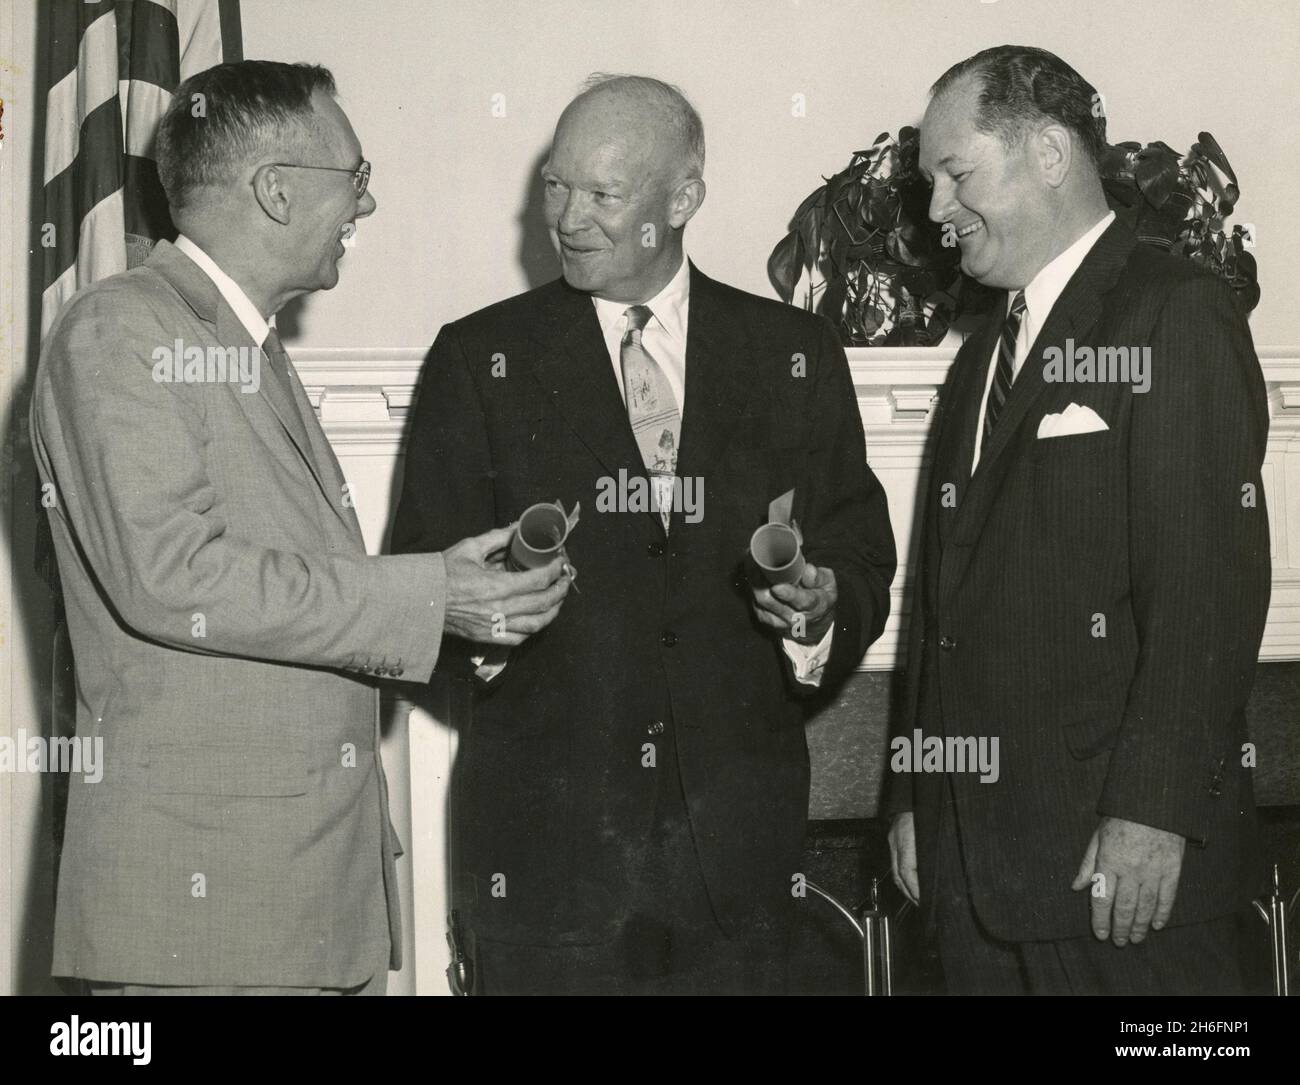 US President Dwight Eisenhower (center) with the heads of NASA Administrator Dr. T. Keith Glennan (right), and deputy Hugh L. Dryden, USA 1958 Stock Photo